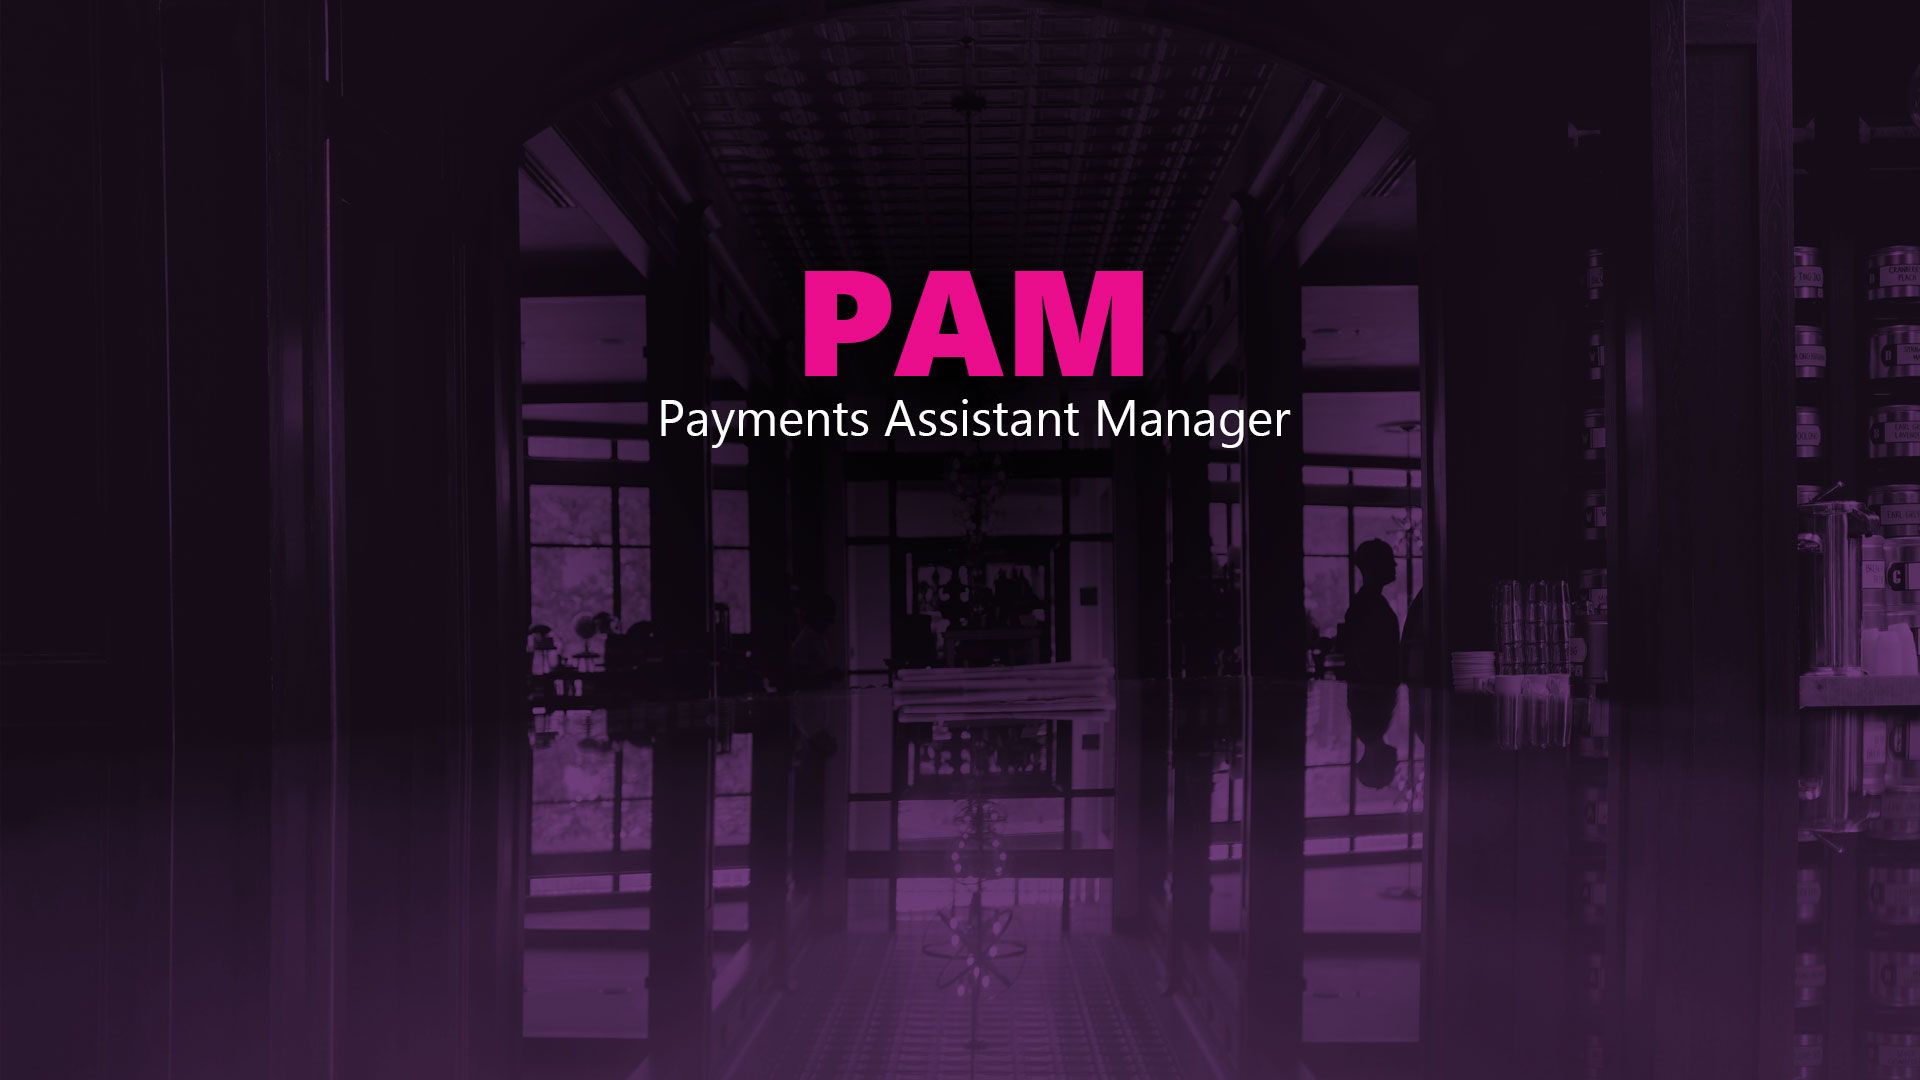 Payments Assistant Manager (PAM)